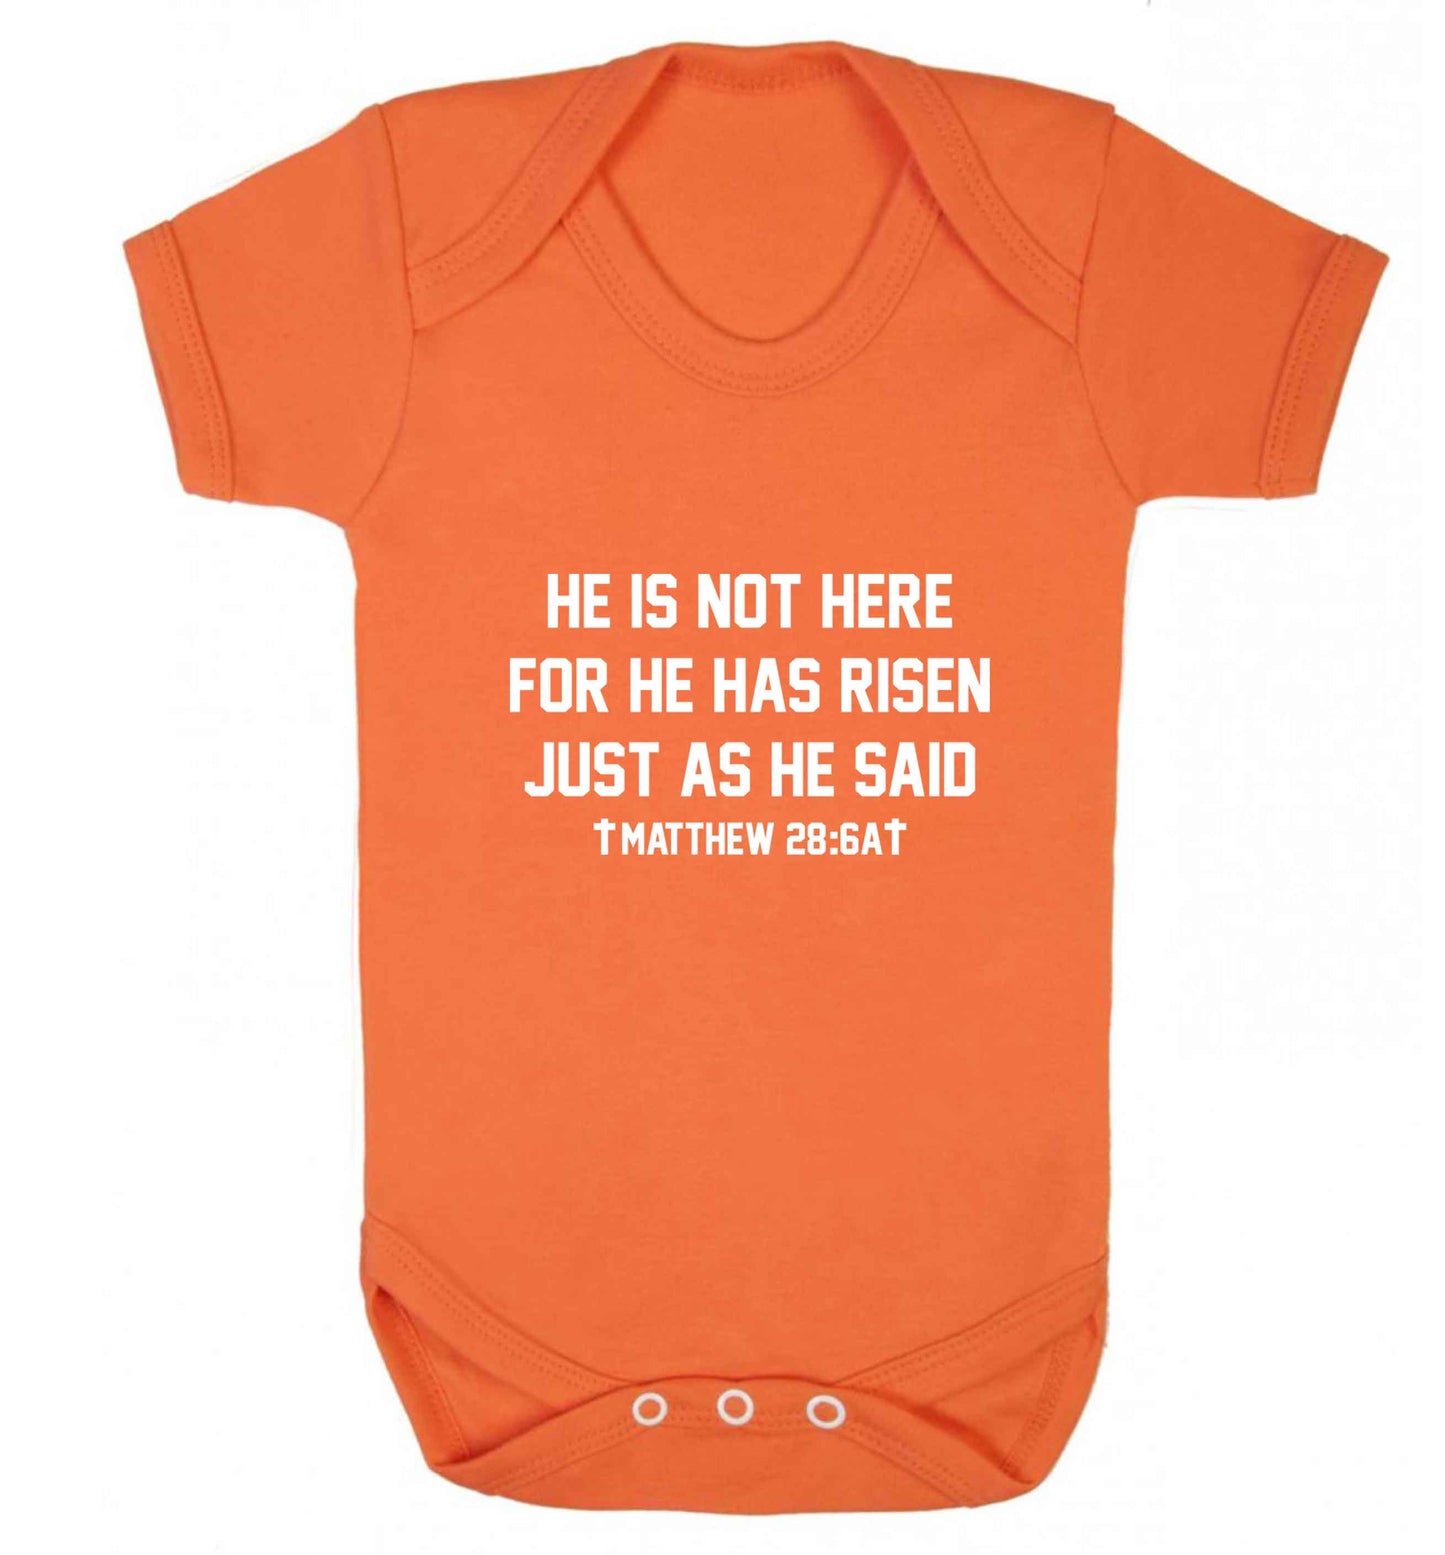 He is not here for he has risen just as he said matthew 28:6A baby vest orange 18-24 months